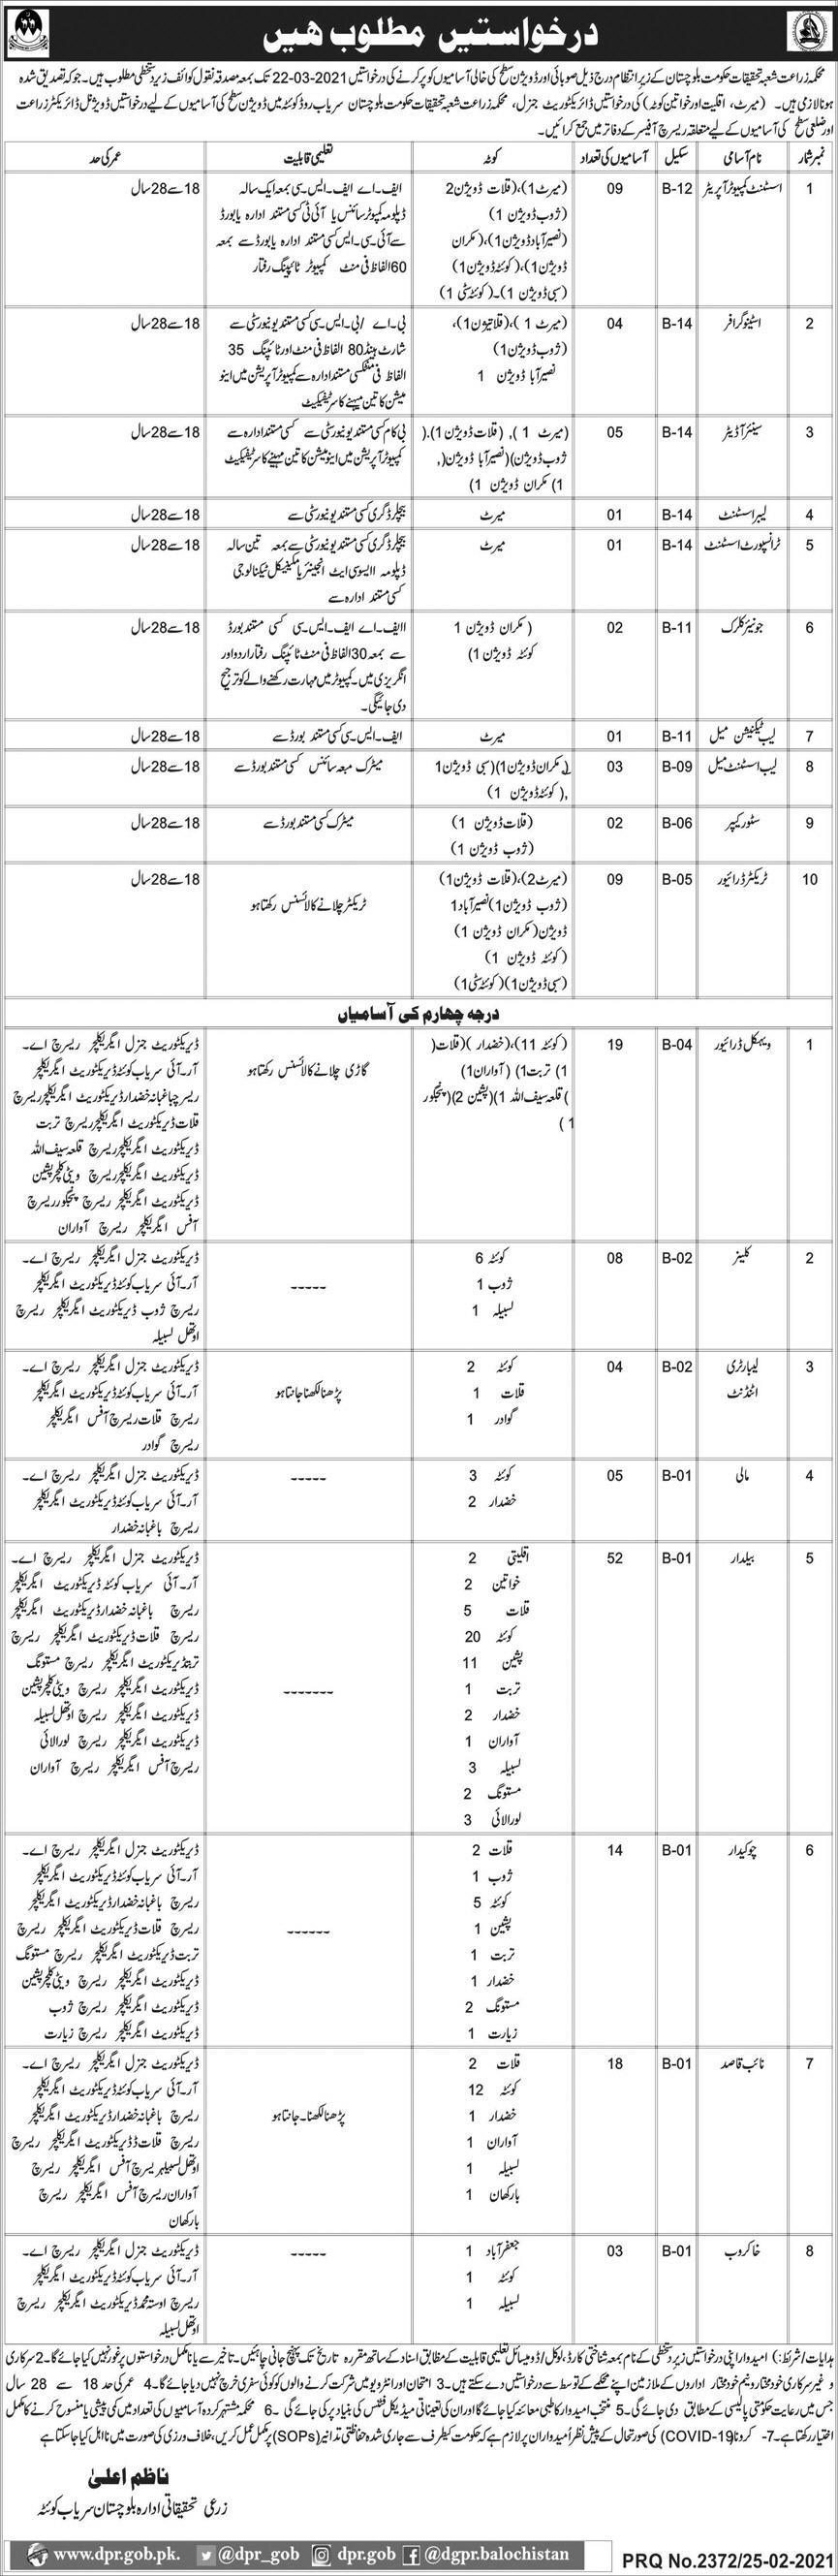 Agriculture Research Institute Balochistan Jobs 2021 February